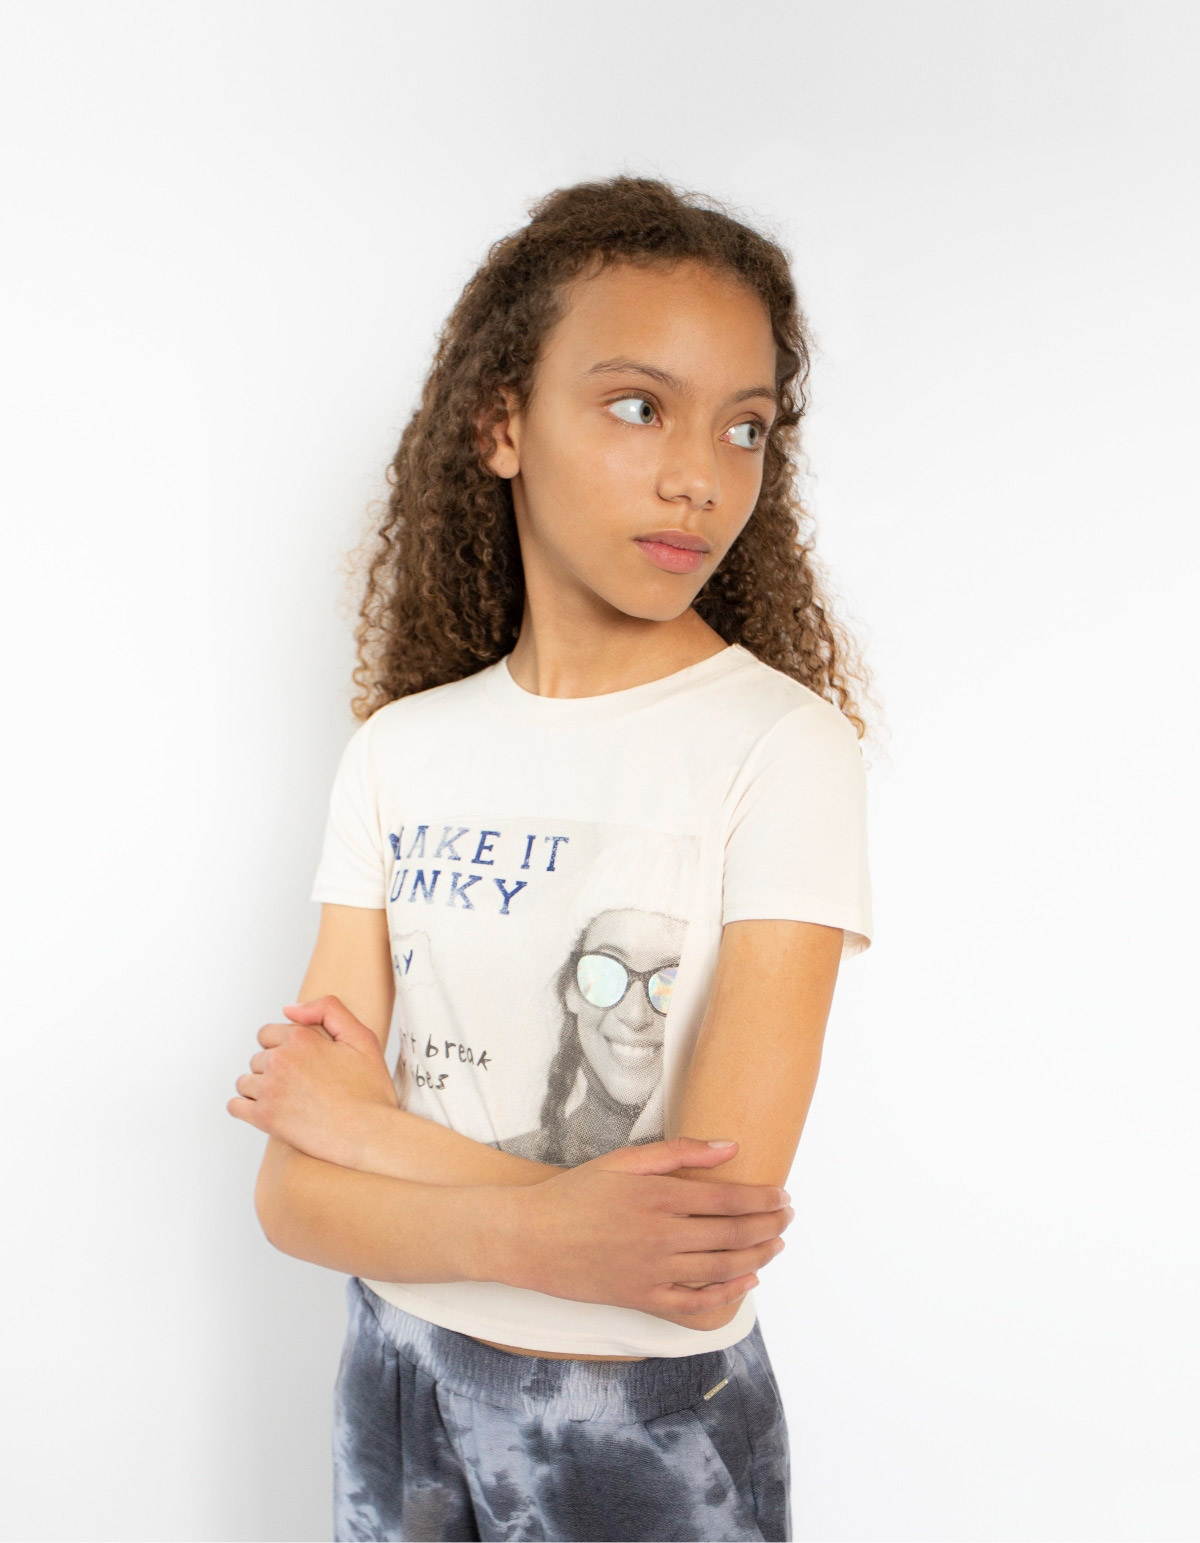 Girls’ mastic cropped T-shirt with girl image and slogan